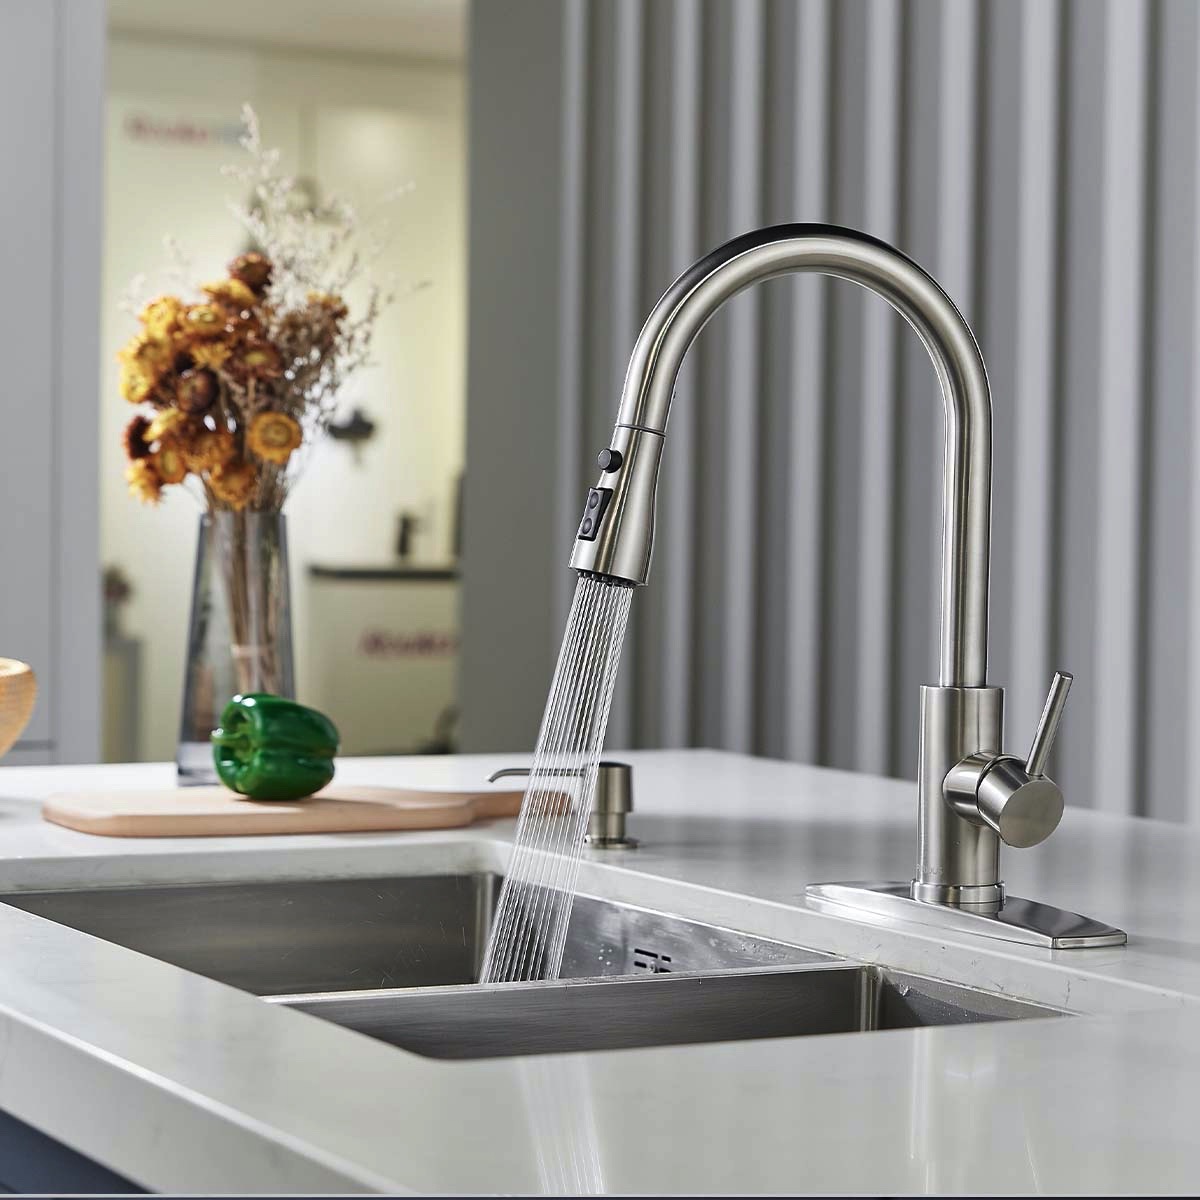 Forious Kitchen Faucet for Pull Down Sprayer Single Handle Sink Faucet Brushed Nickel in Kitchen - image 1 of 10